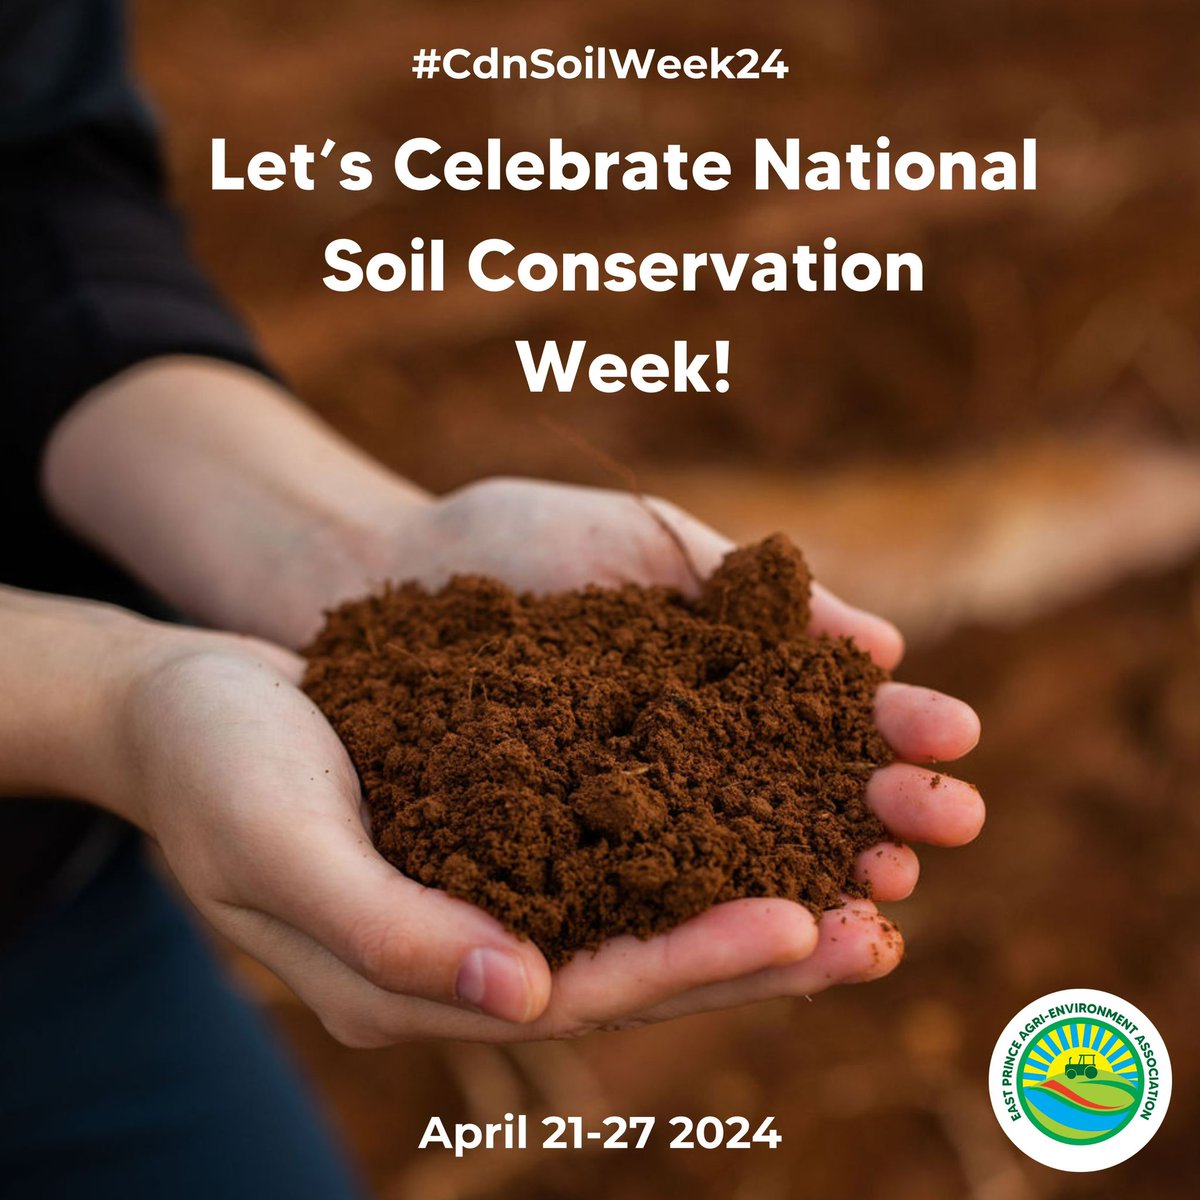 #FridayFeature! 📸

It’s #CdnSoilWeek24 🙌

#DYK Soil produces 95% of our food? Despite its importance, soils continue to face challenges like urban expansion & climate change. Farmers & land managers lead the charge in conservation efforts, but we all have a role to play!